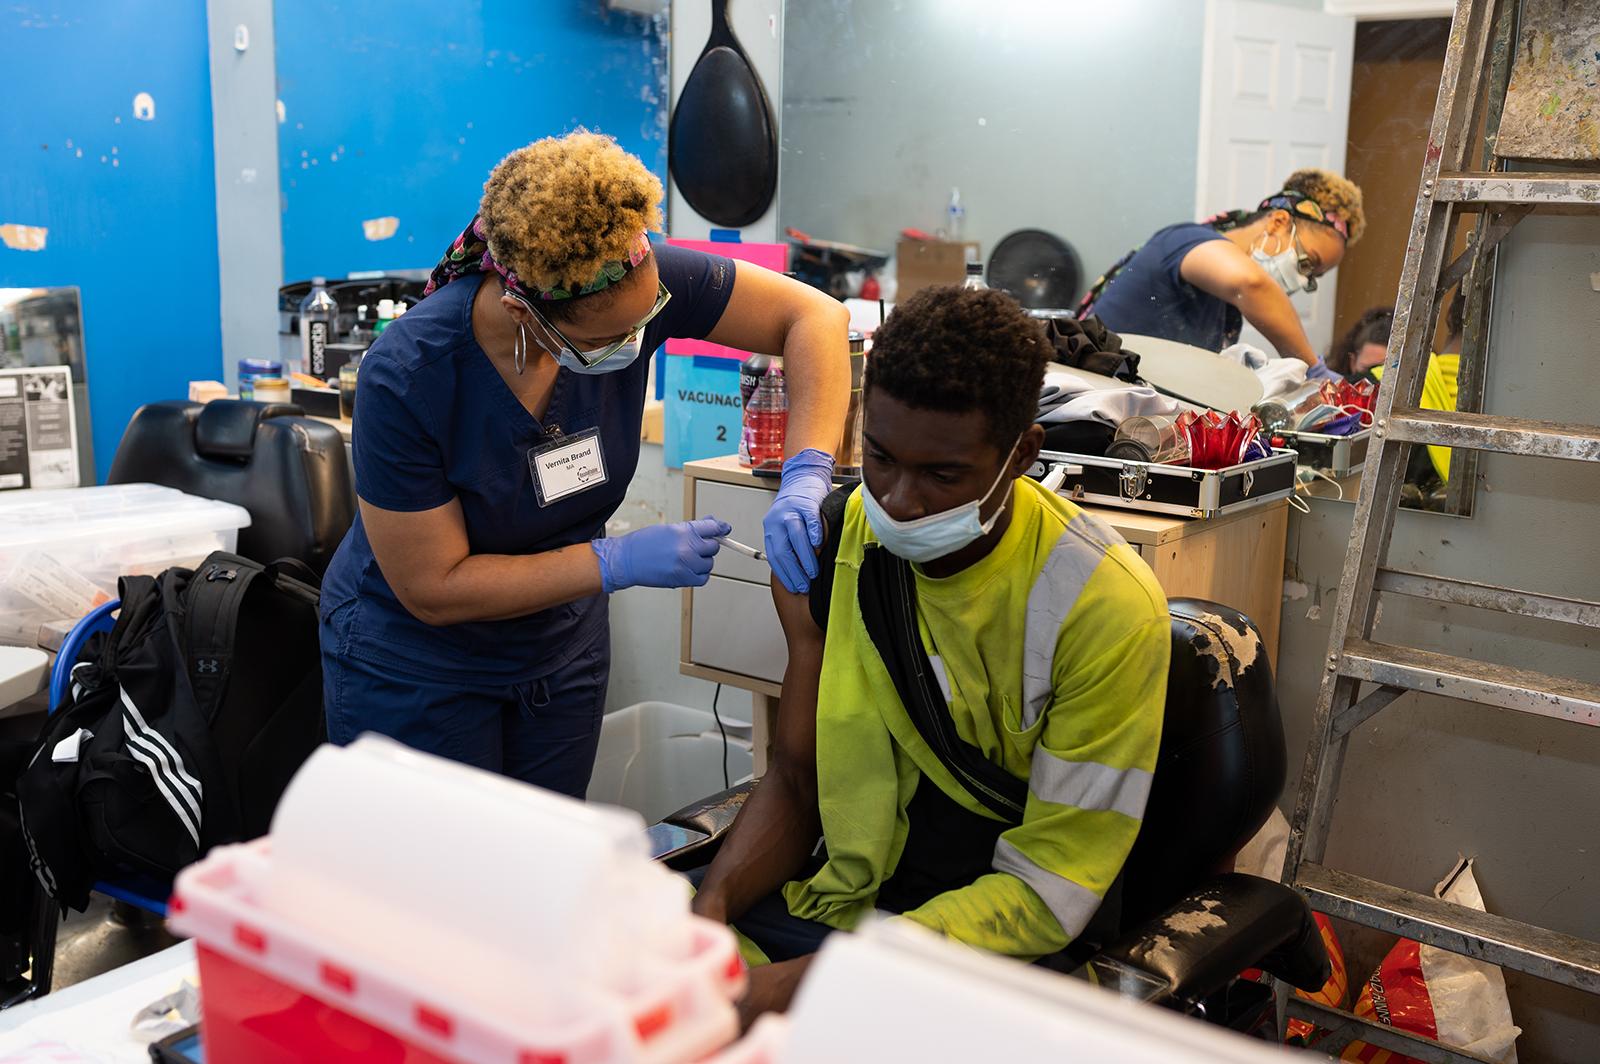 Black female nurse standing up and giving COVID vaccine in the arm of a young Black man who is seated and wearing construction worker clothing.